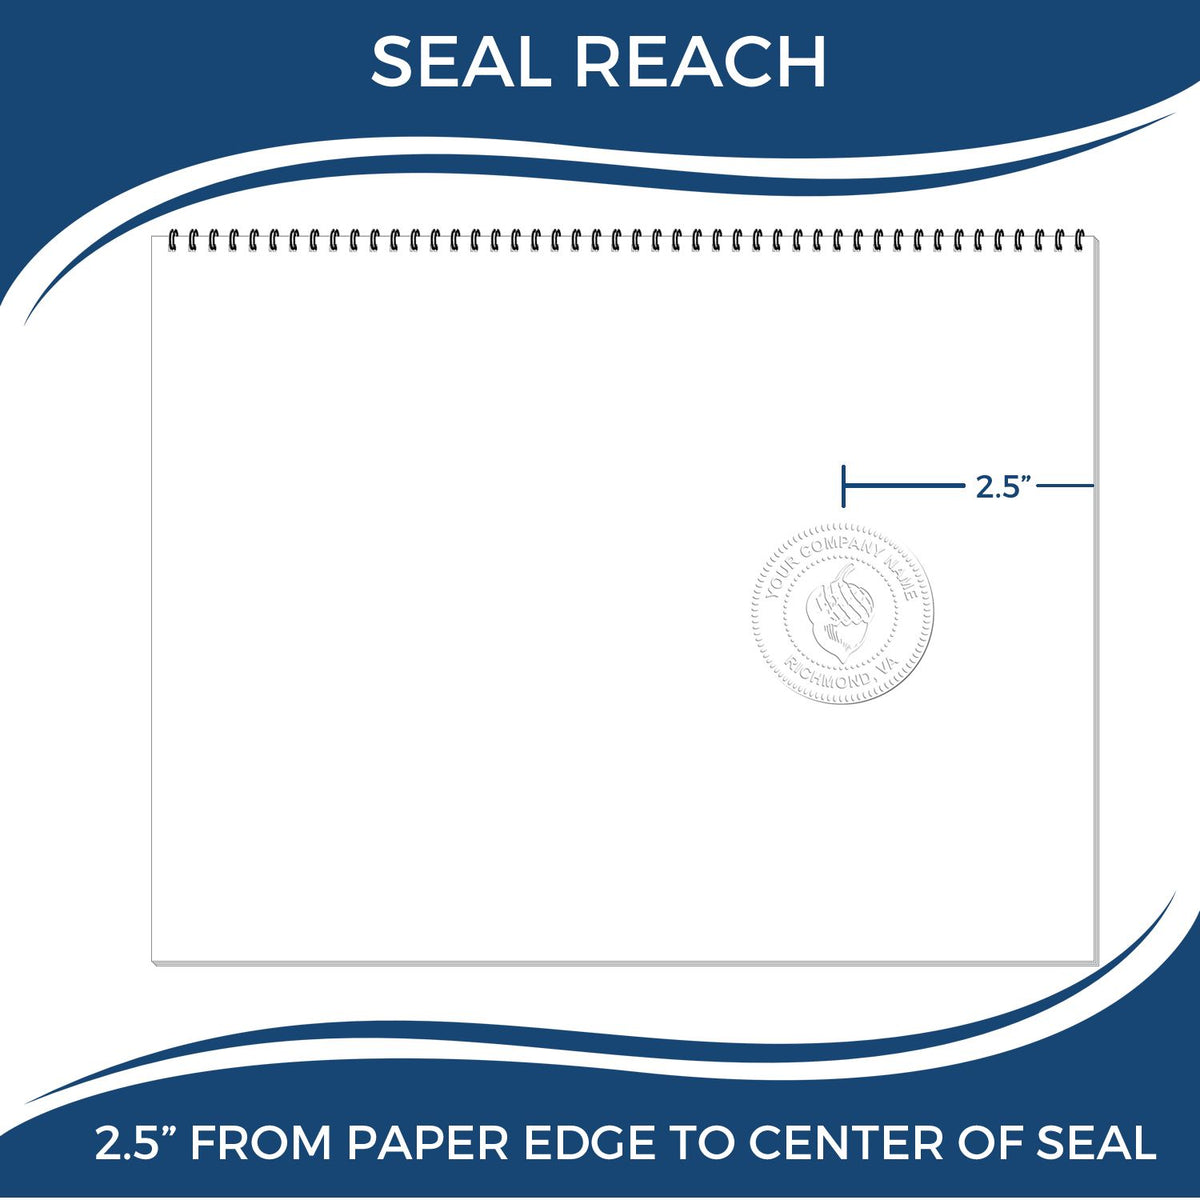 An infographic showing the seal reach which is represented by a ruler and a miniature seal image of the Long Reach Massachusetts Land Surveyor Seal